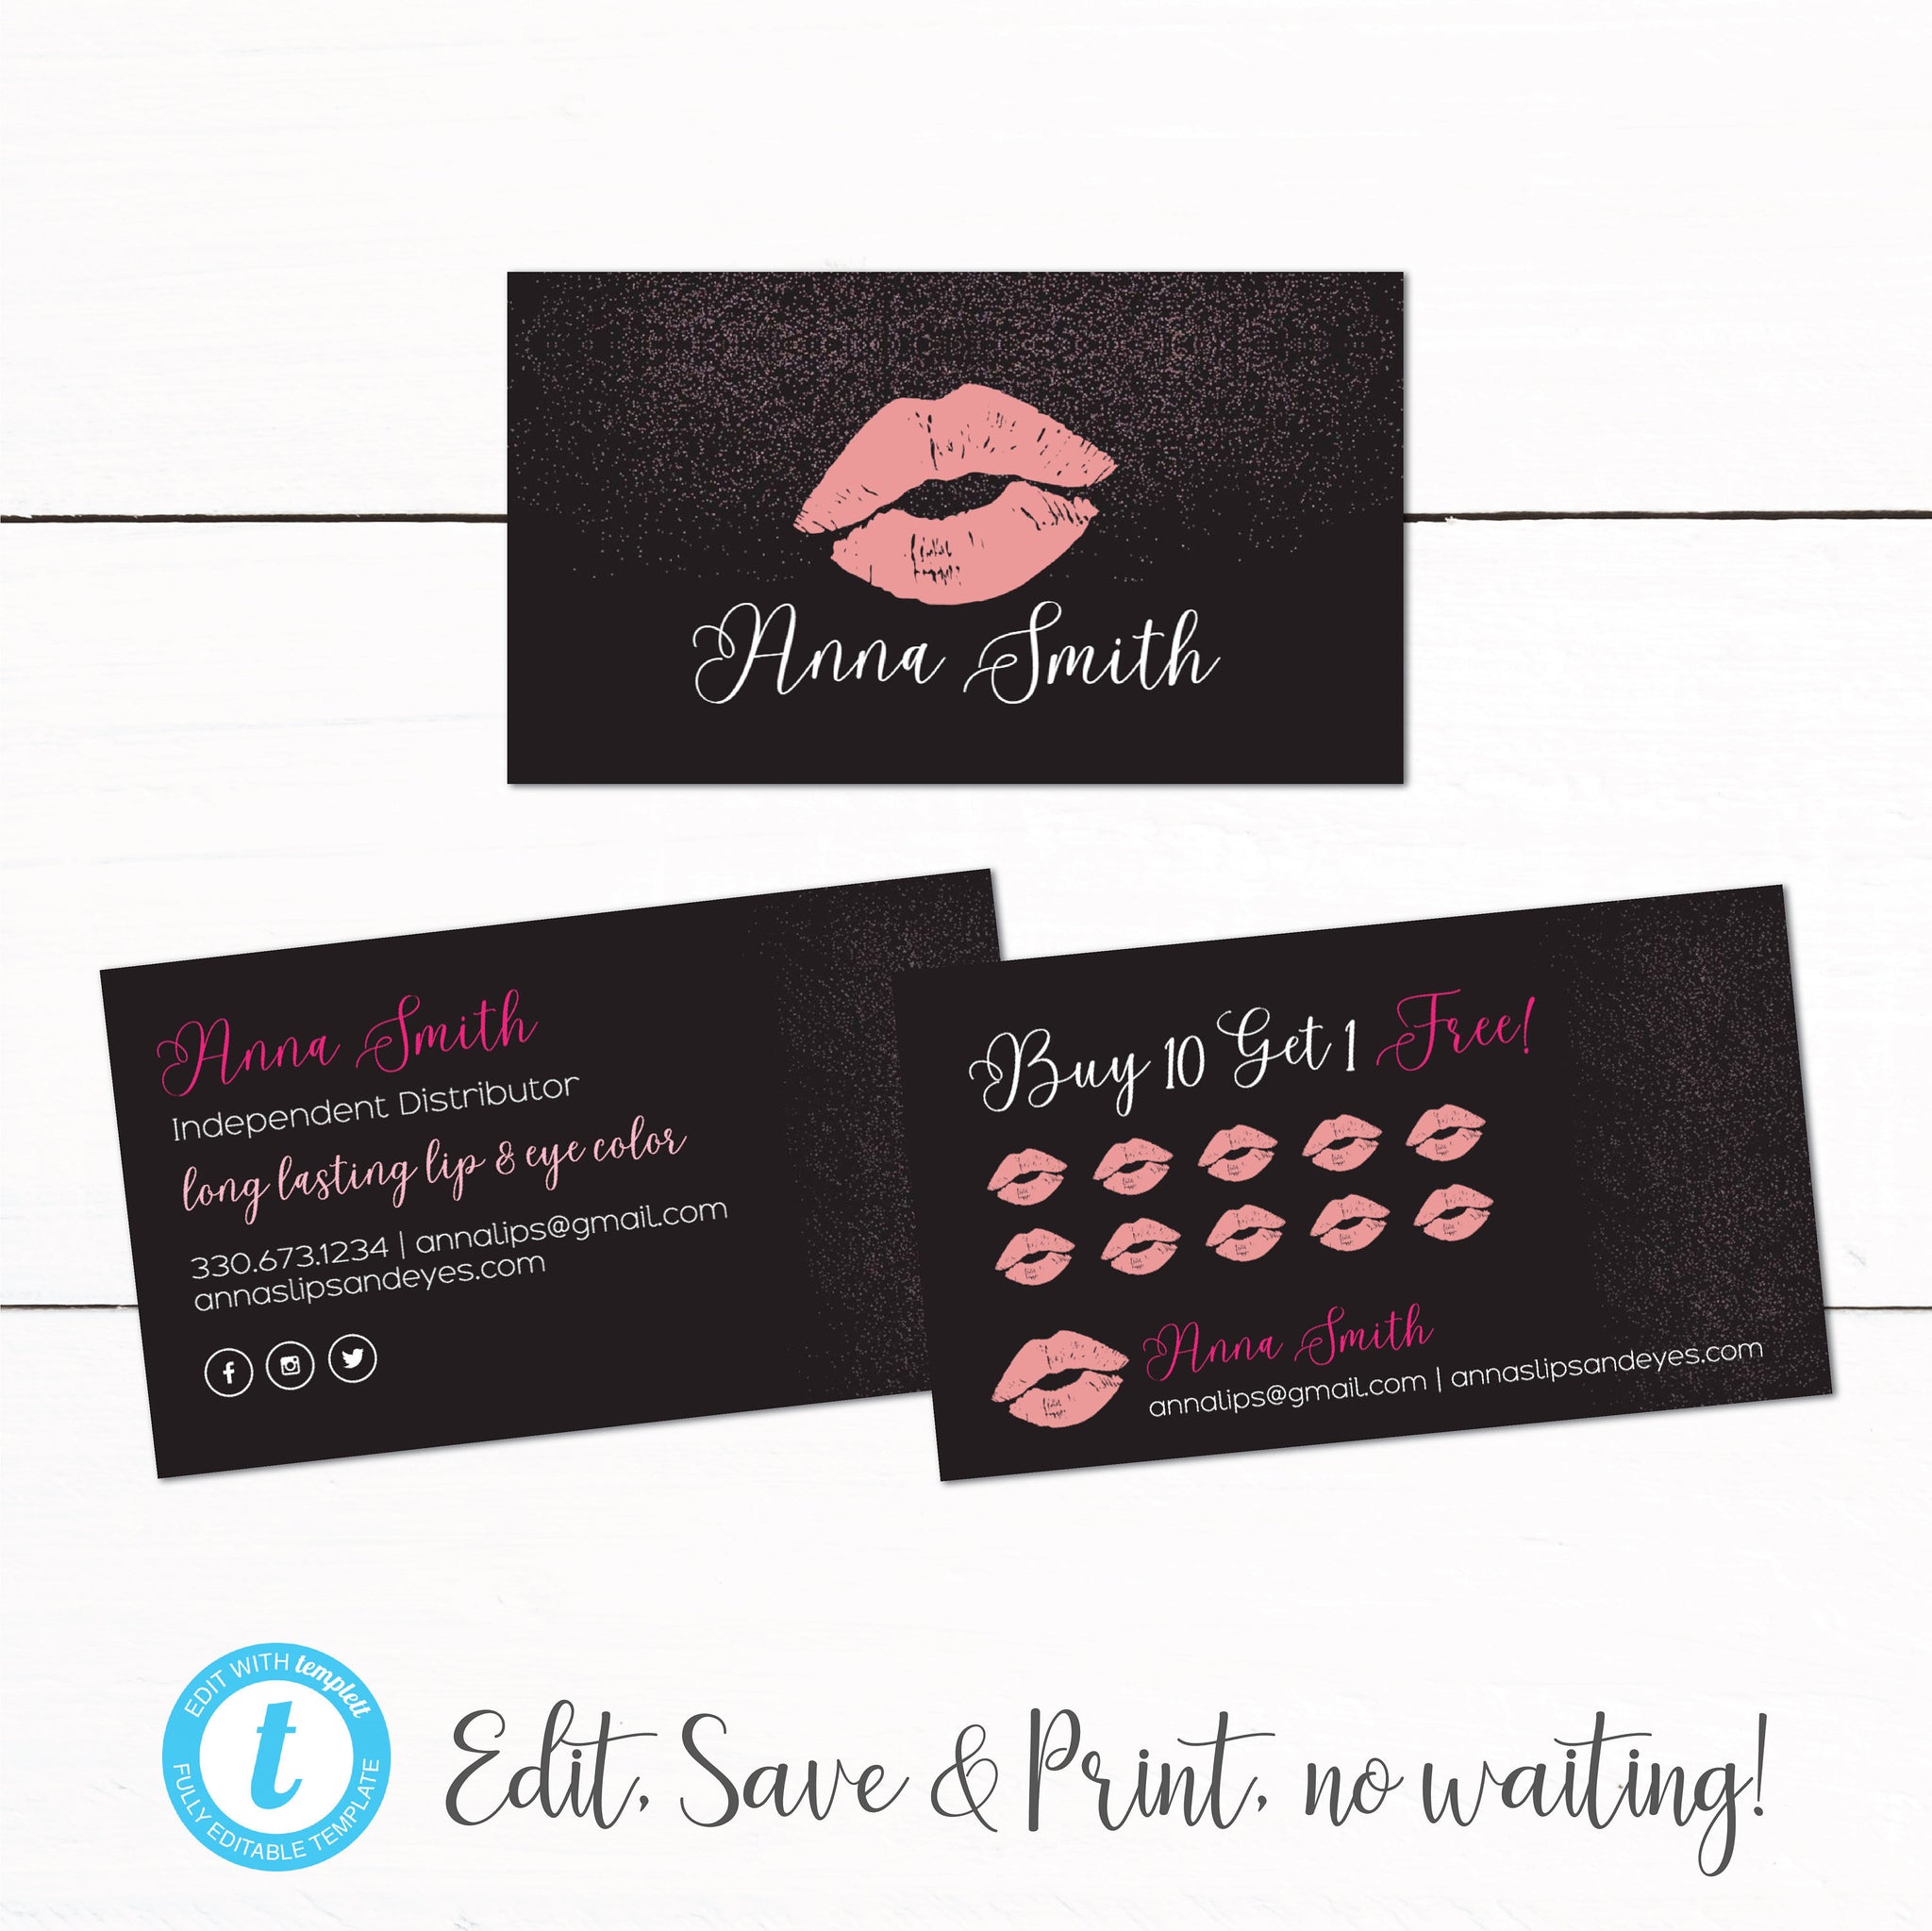 Punch Business Cards